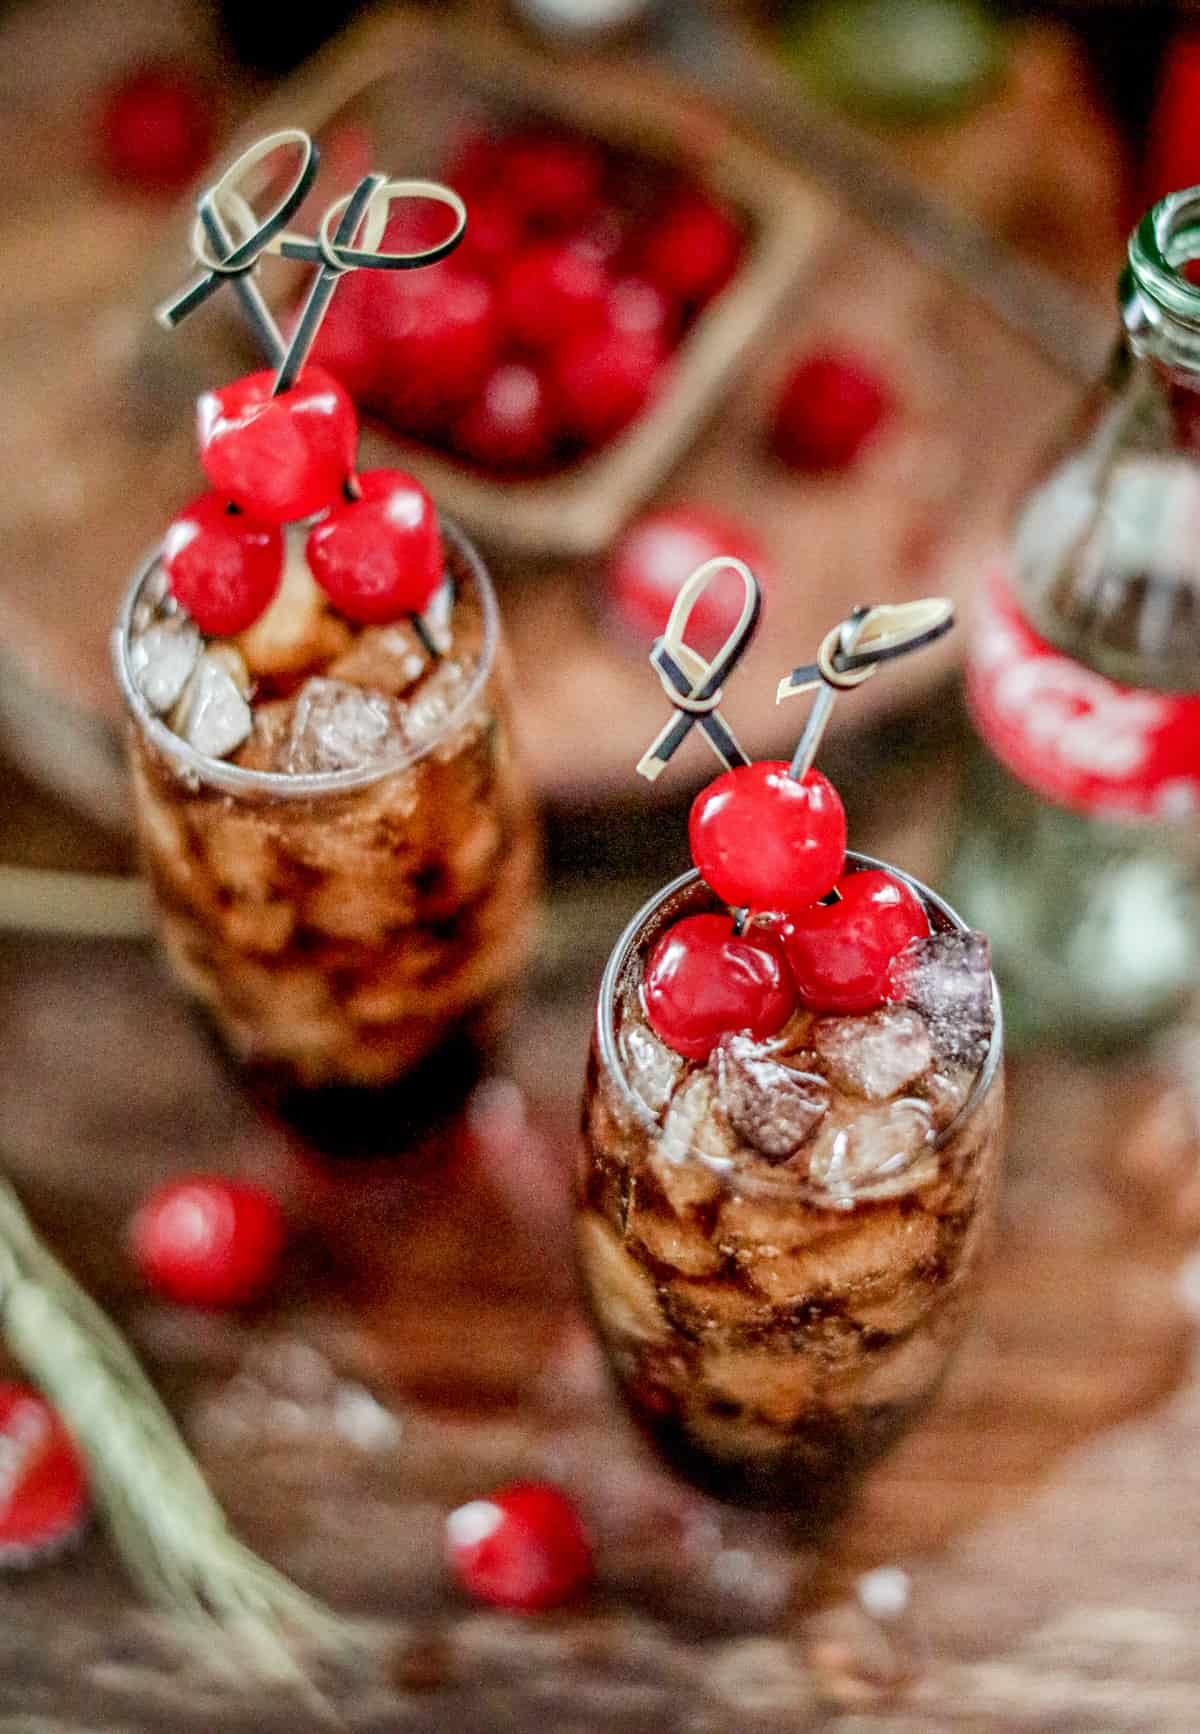 Overhead of finished drinks garnished with cherries and a cola bottle in background.